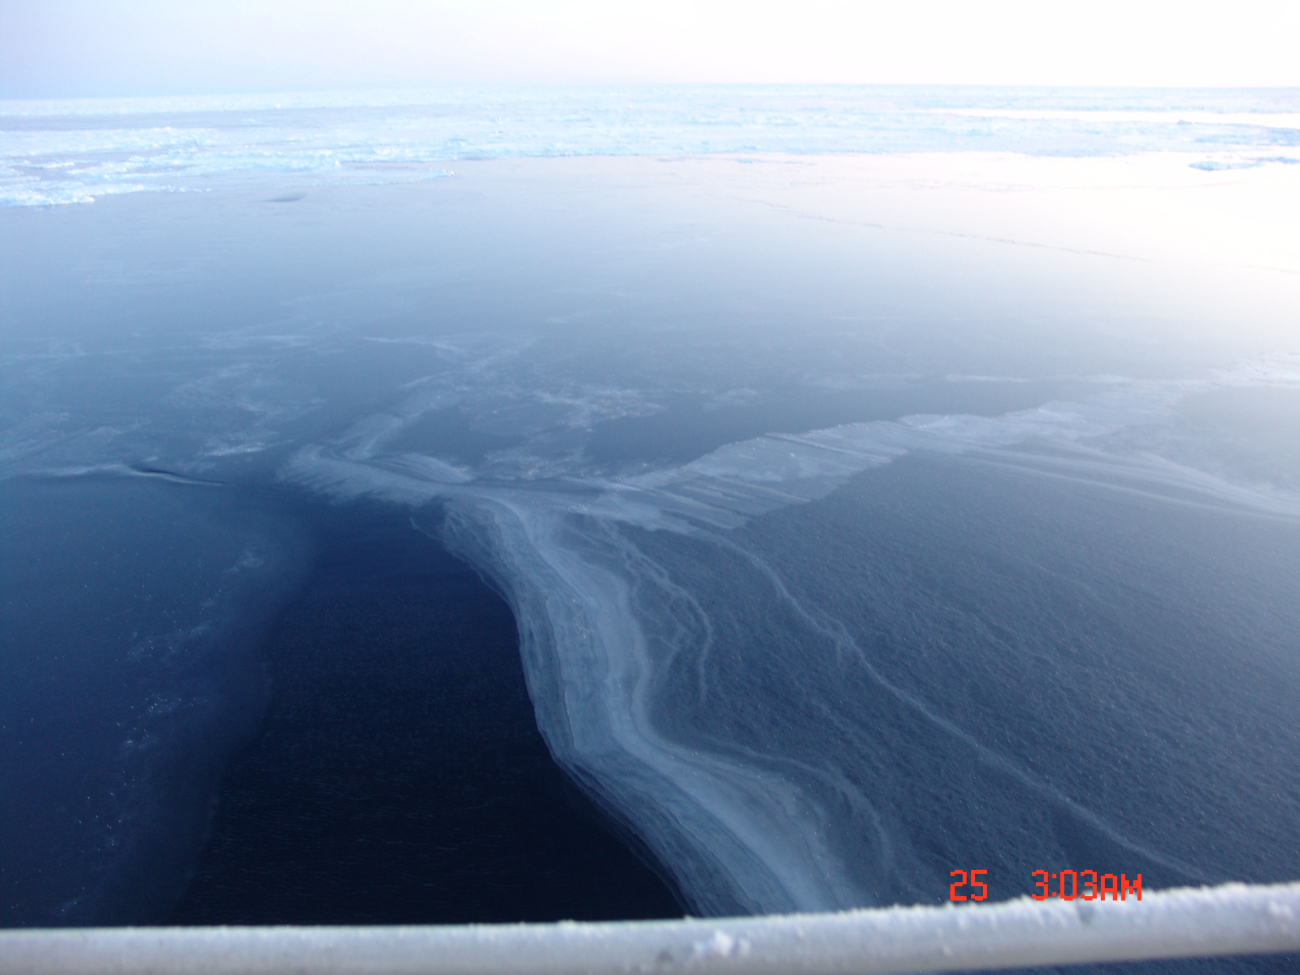 Frazil ice on lower left of image, nilas to right and ice floes extending tohorizon